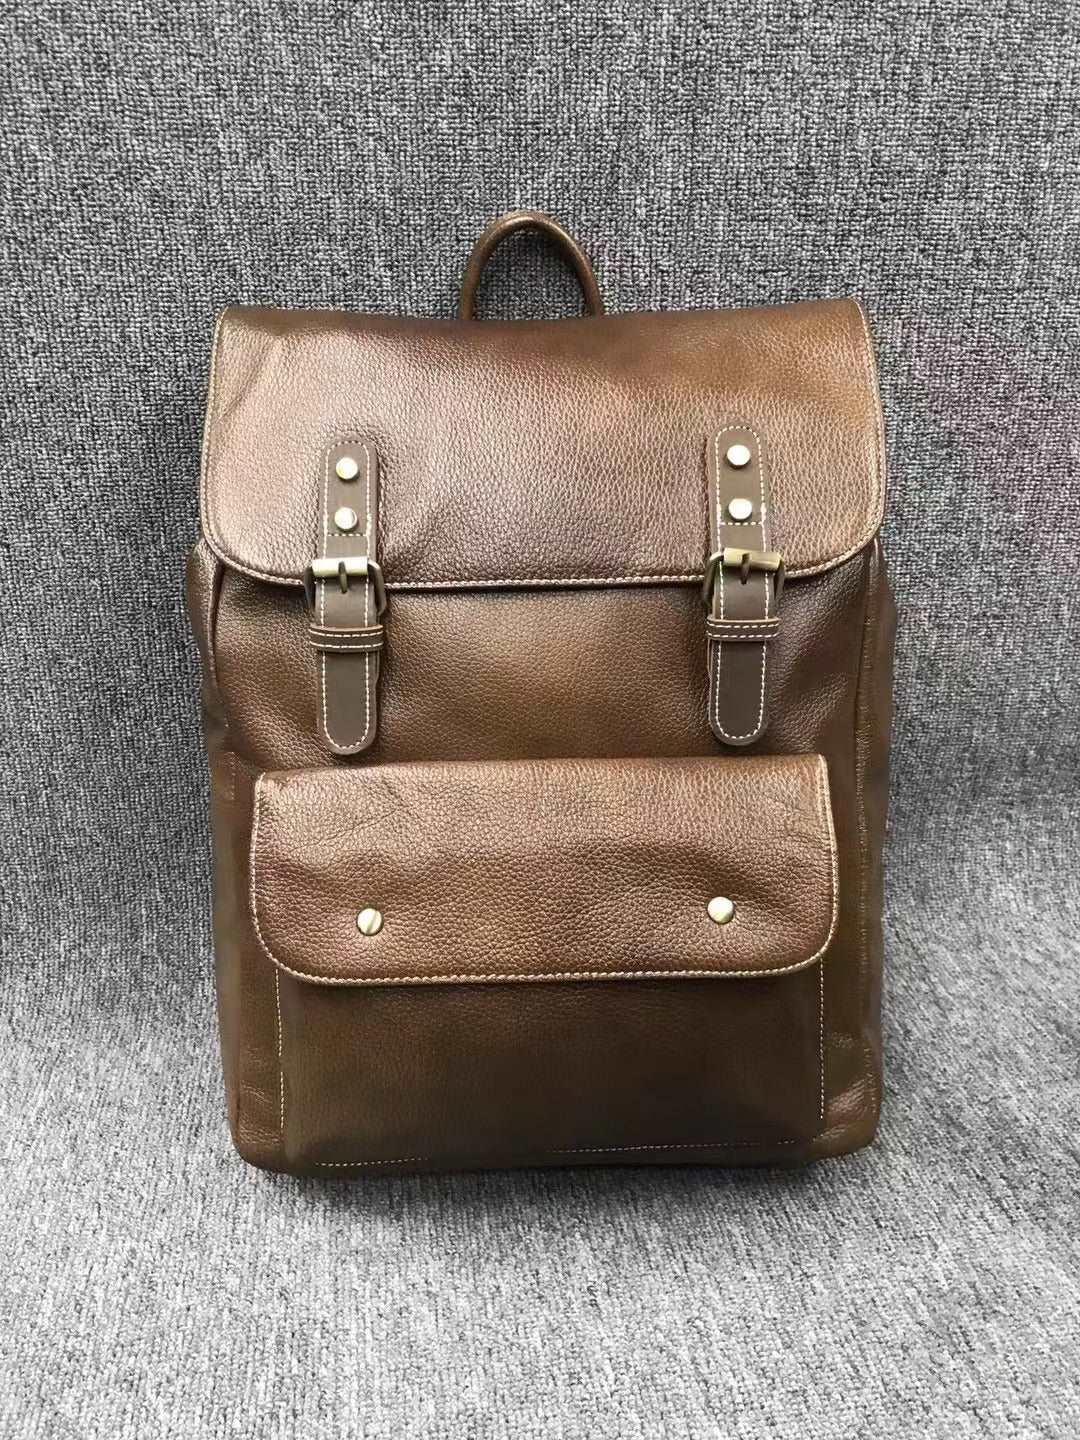 Retro Leather Backpack for Men with Built-in Laptop Sleeve woyaza